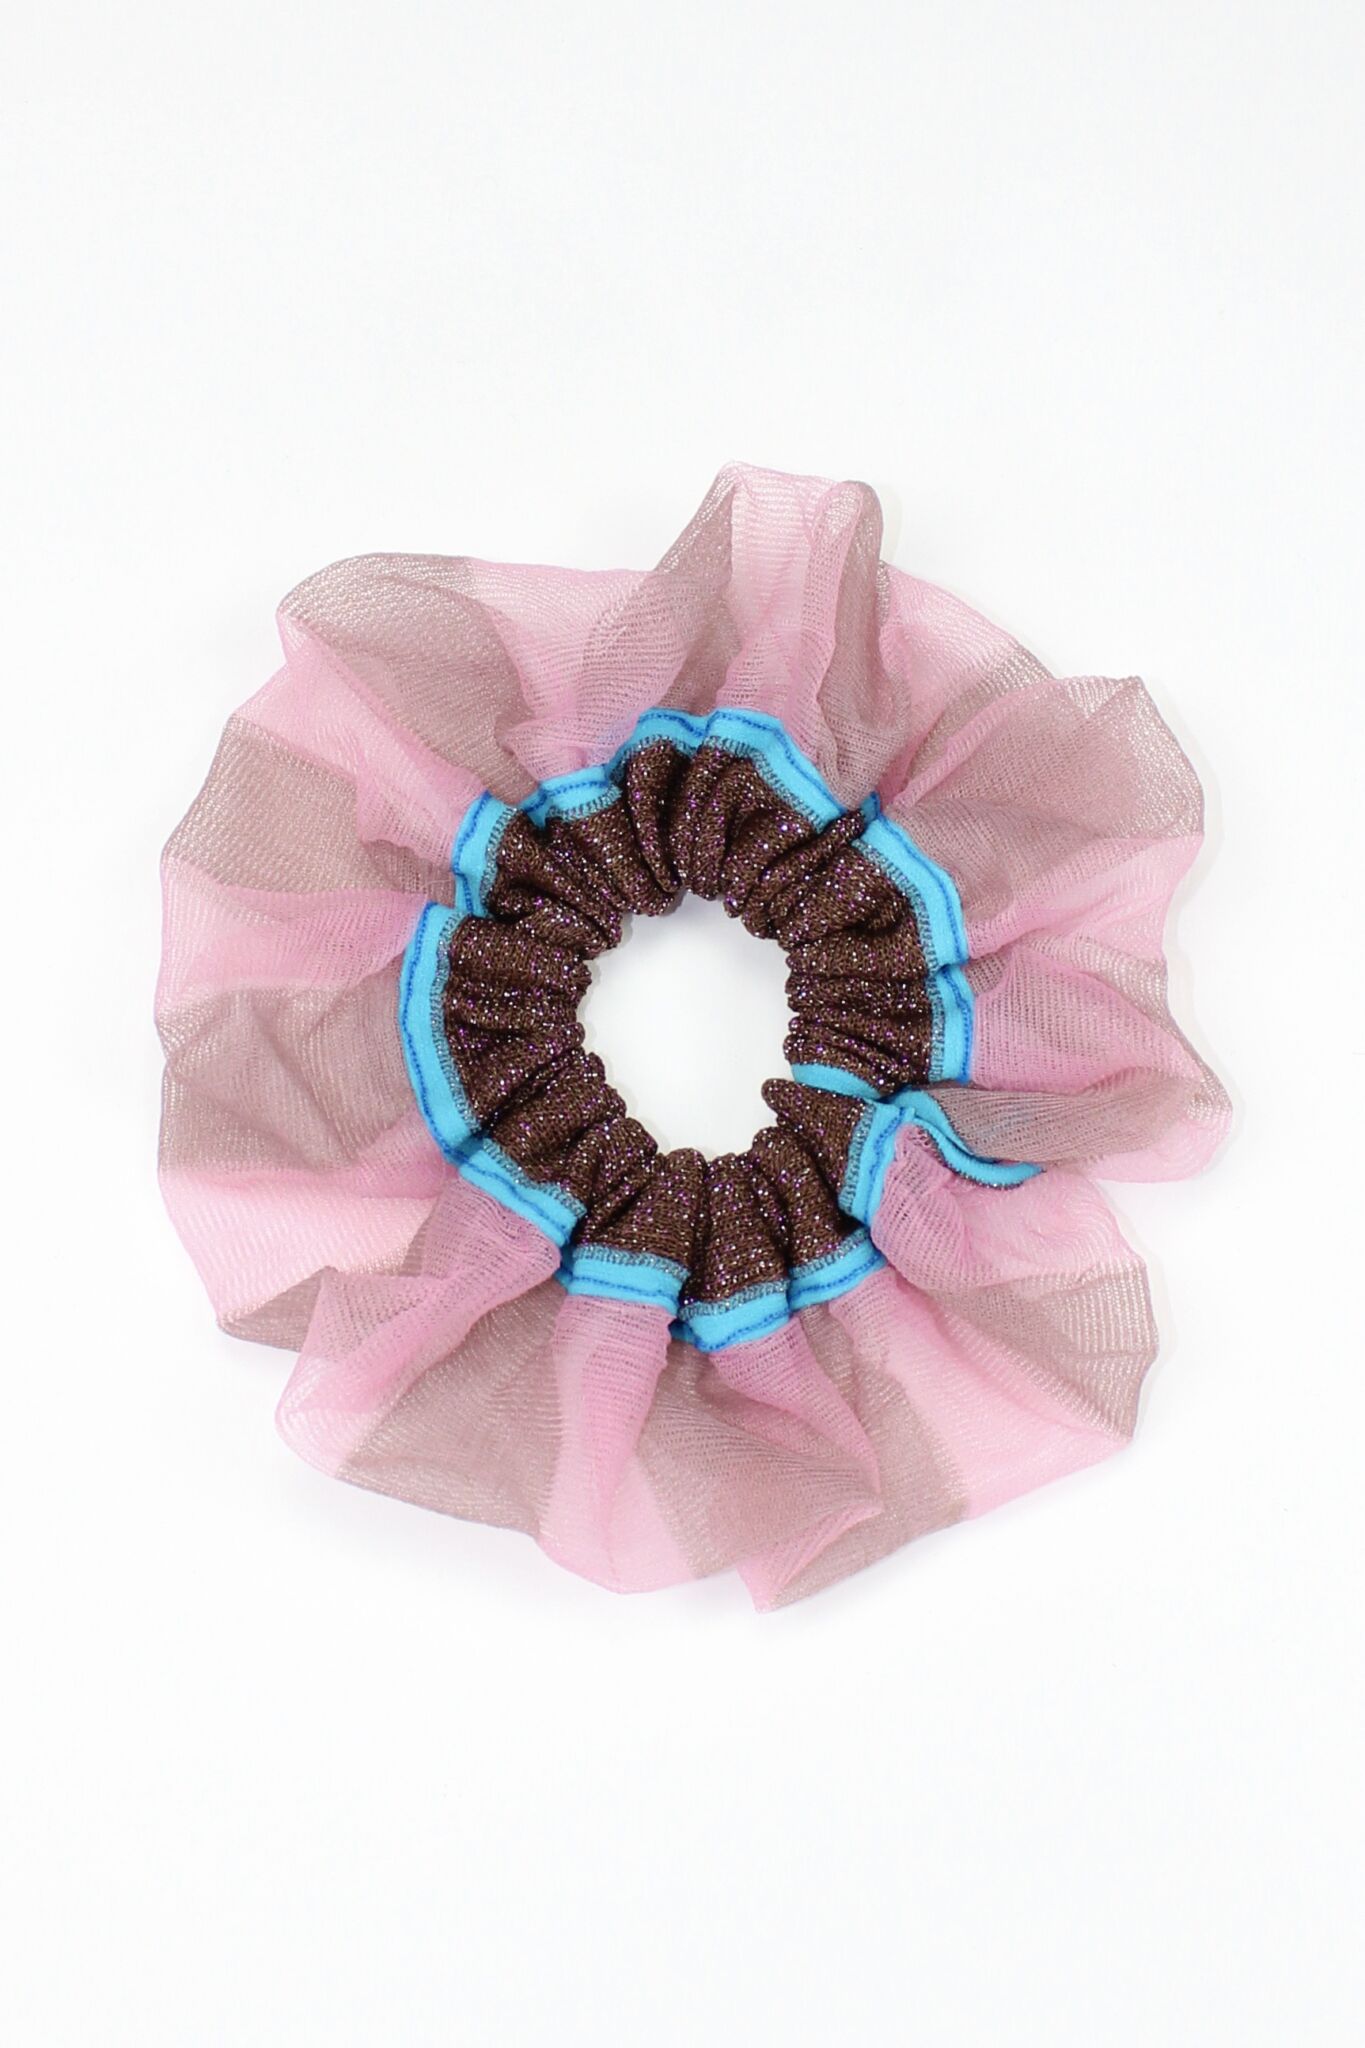 Petunia Scrunchie in tanned and pink is a knitted scrunchie in bold stripes. Made of transparent and shimmery yarns.